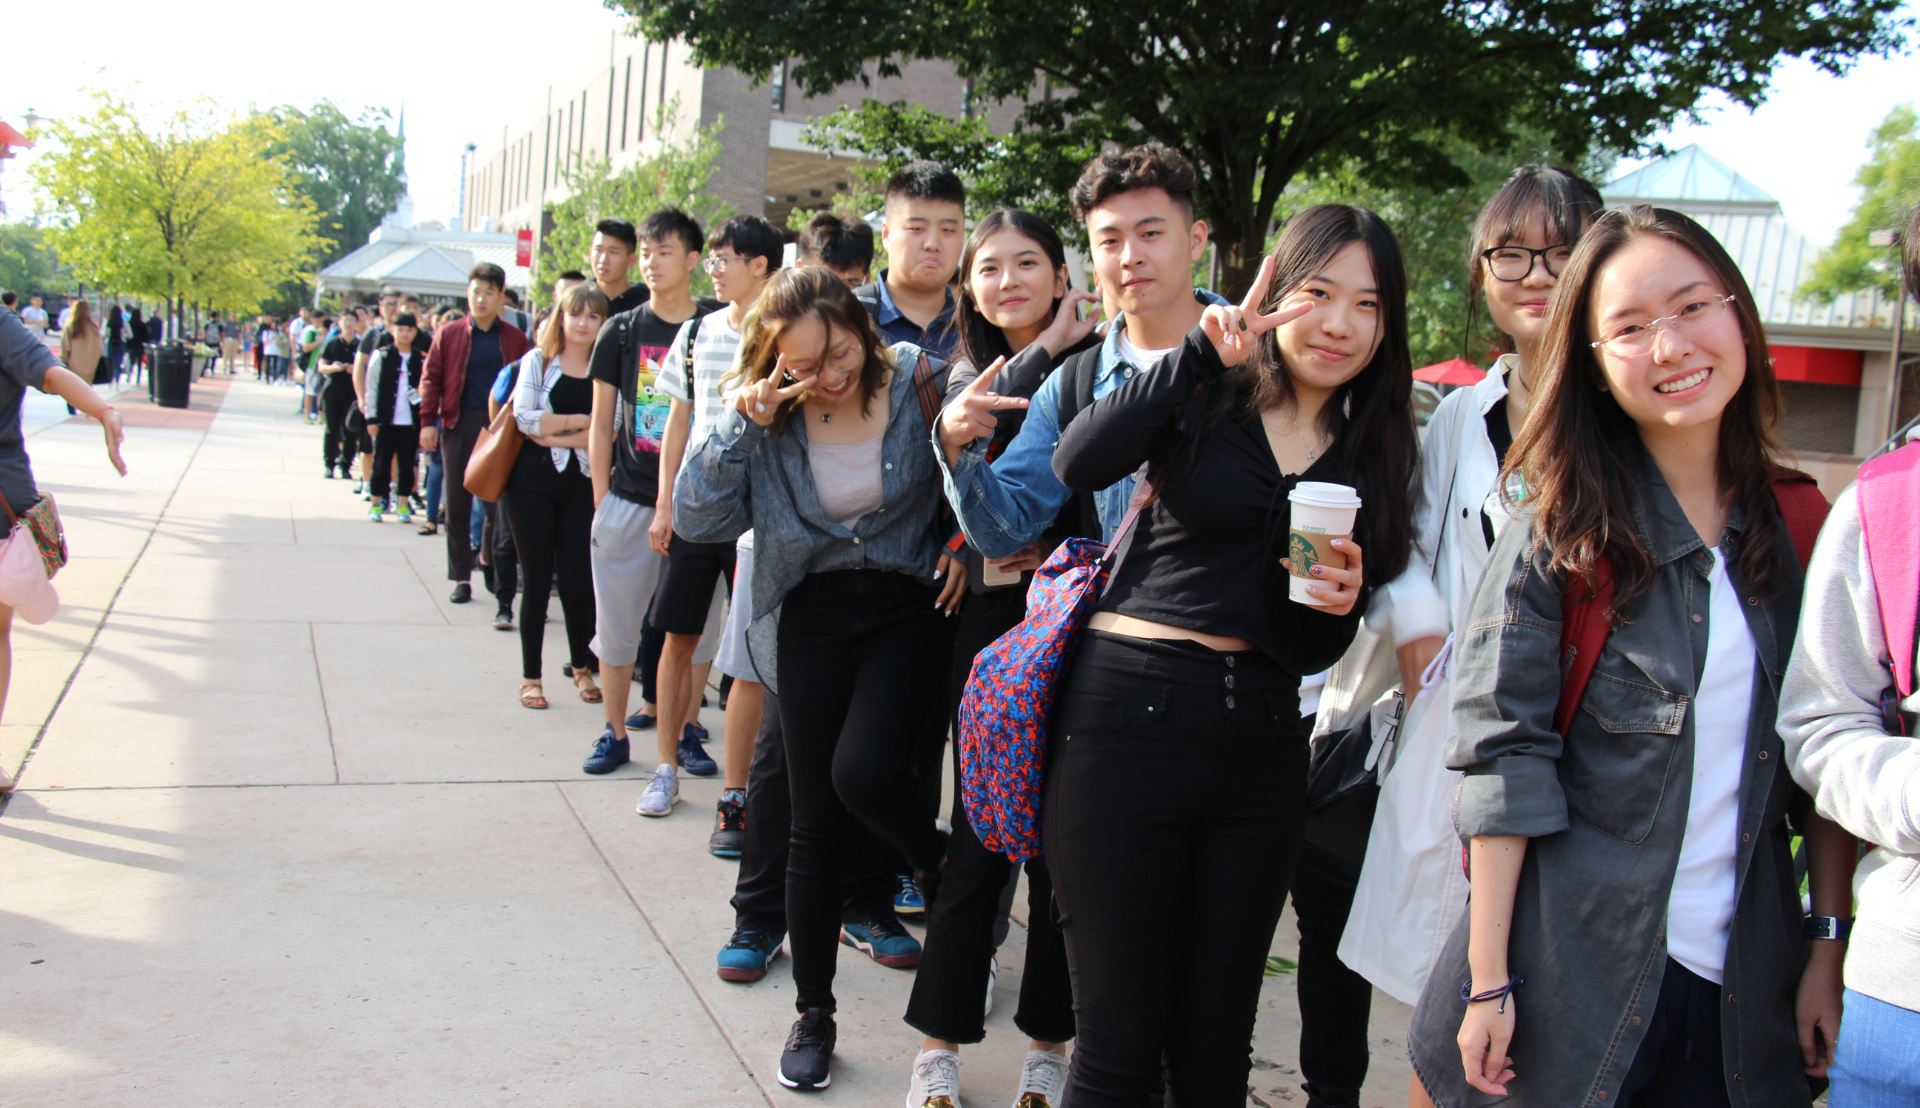 Rutgers Global - International Student Orientation 2018, Students waiting in line